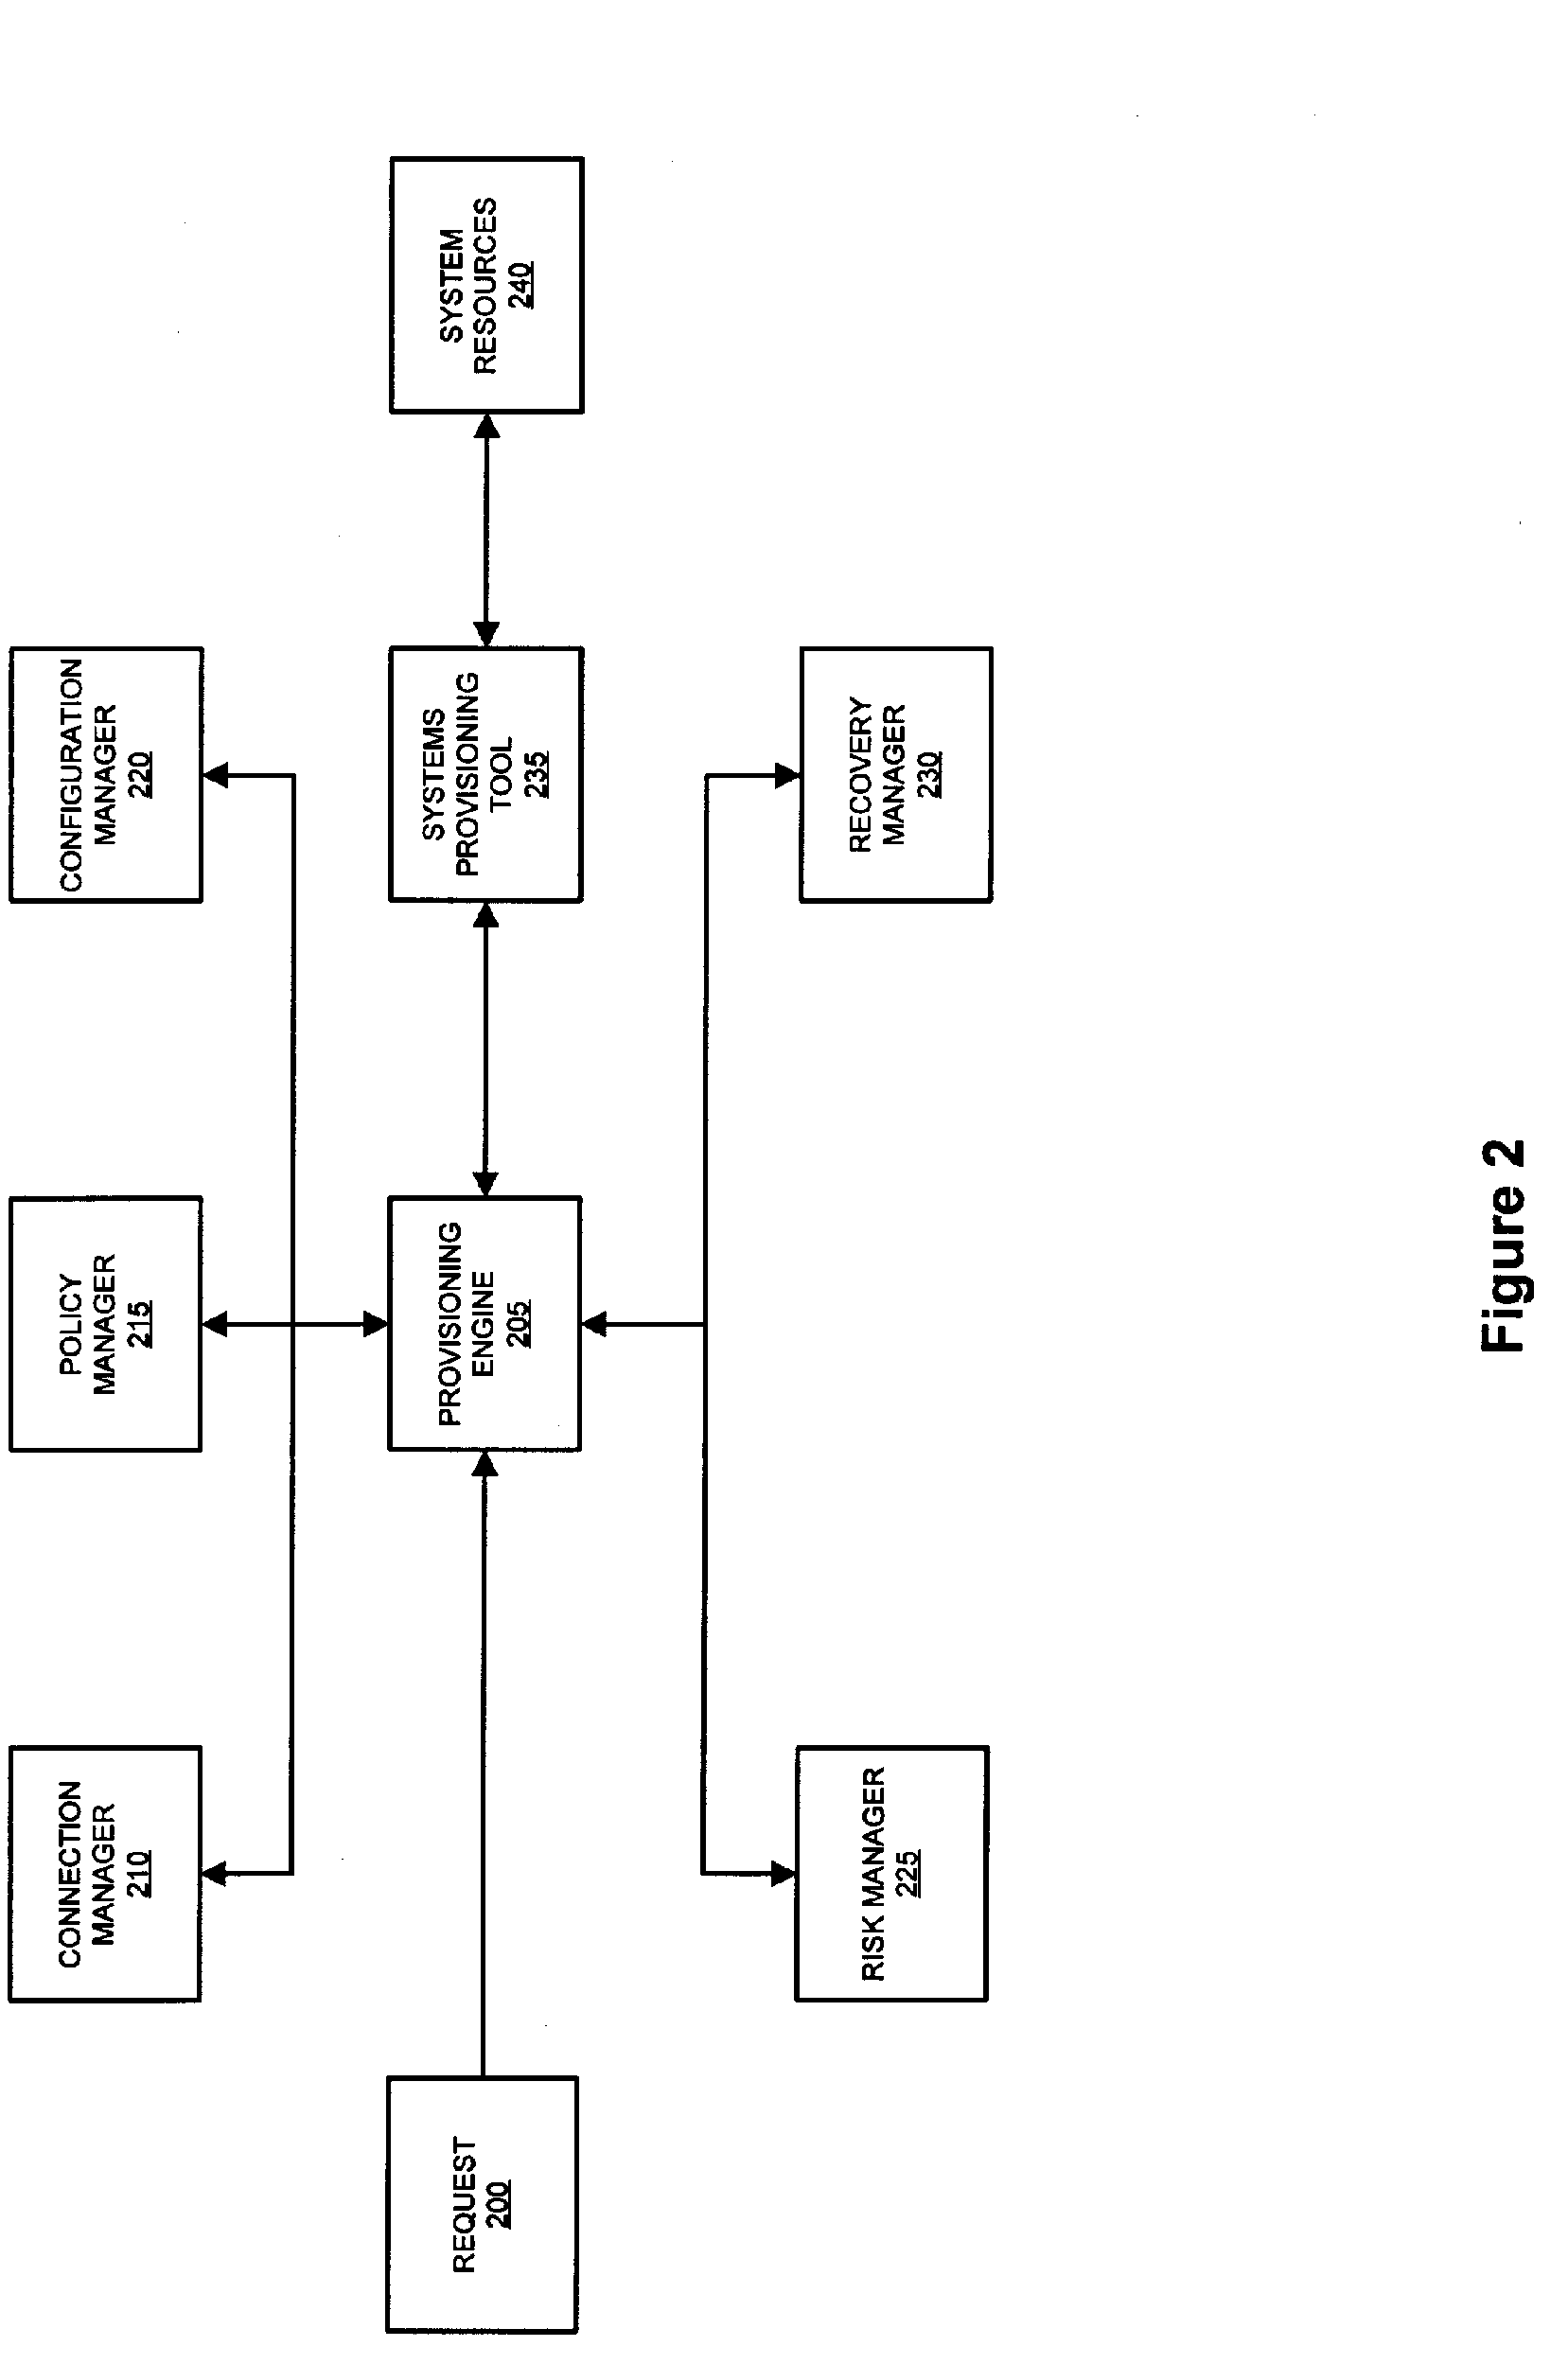 System and method for dynamic security provisioning of computing resources